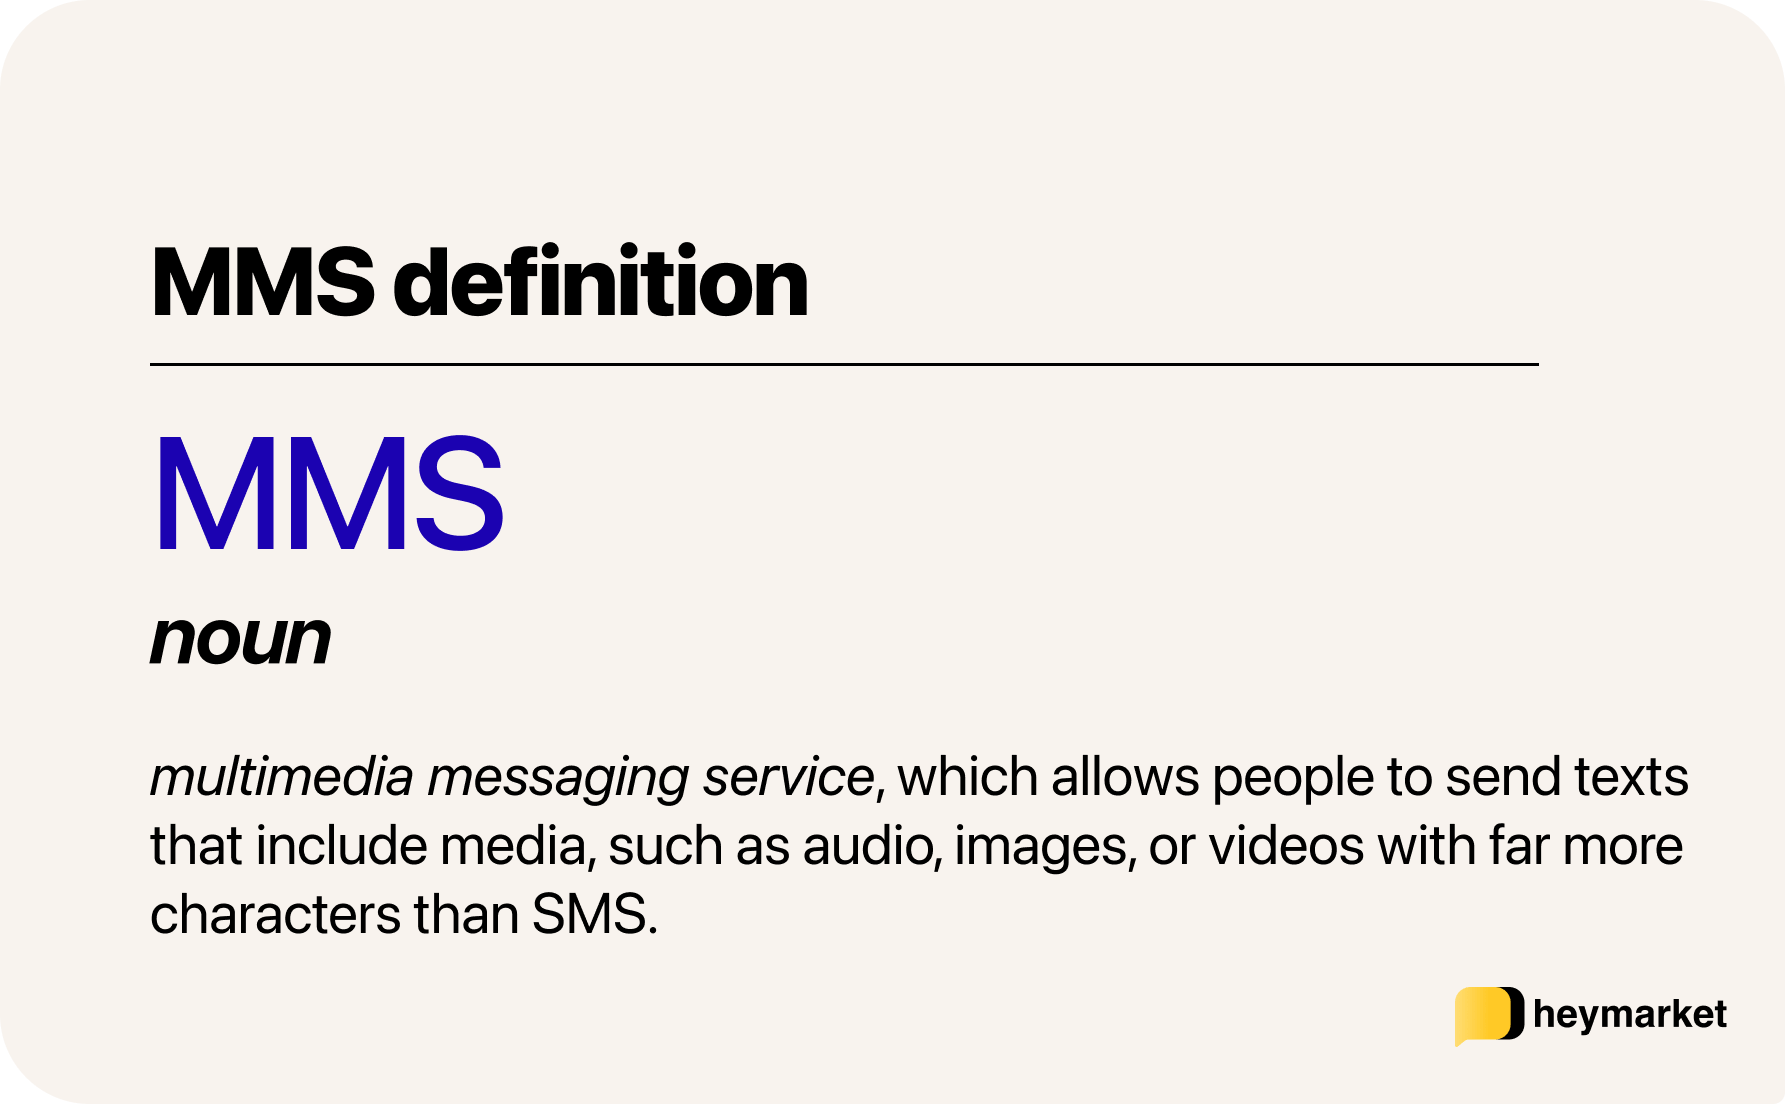 MMS definition: Multimedia messaging service, which allows people to send texts that include media, such as audio, images, or videos with far more characters than SMS.